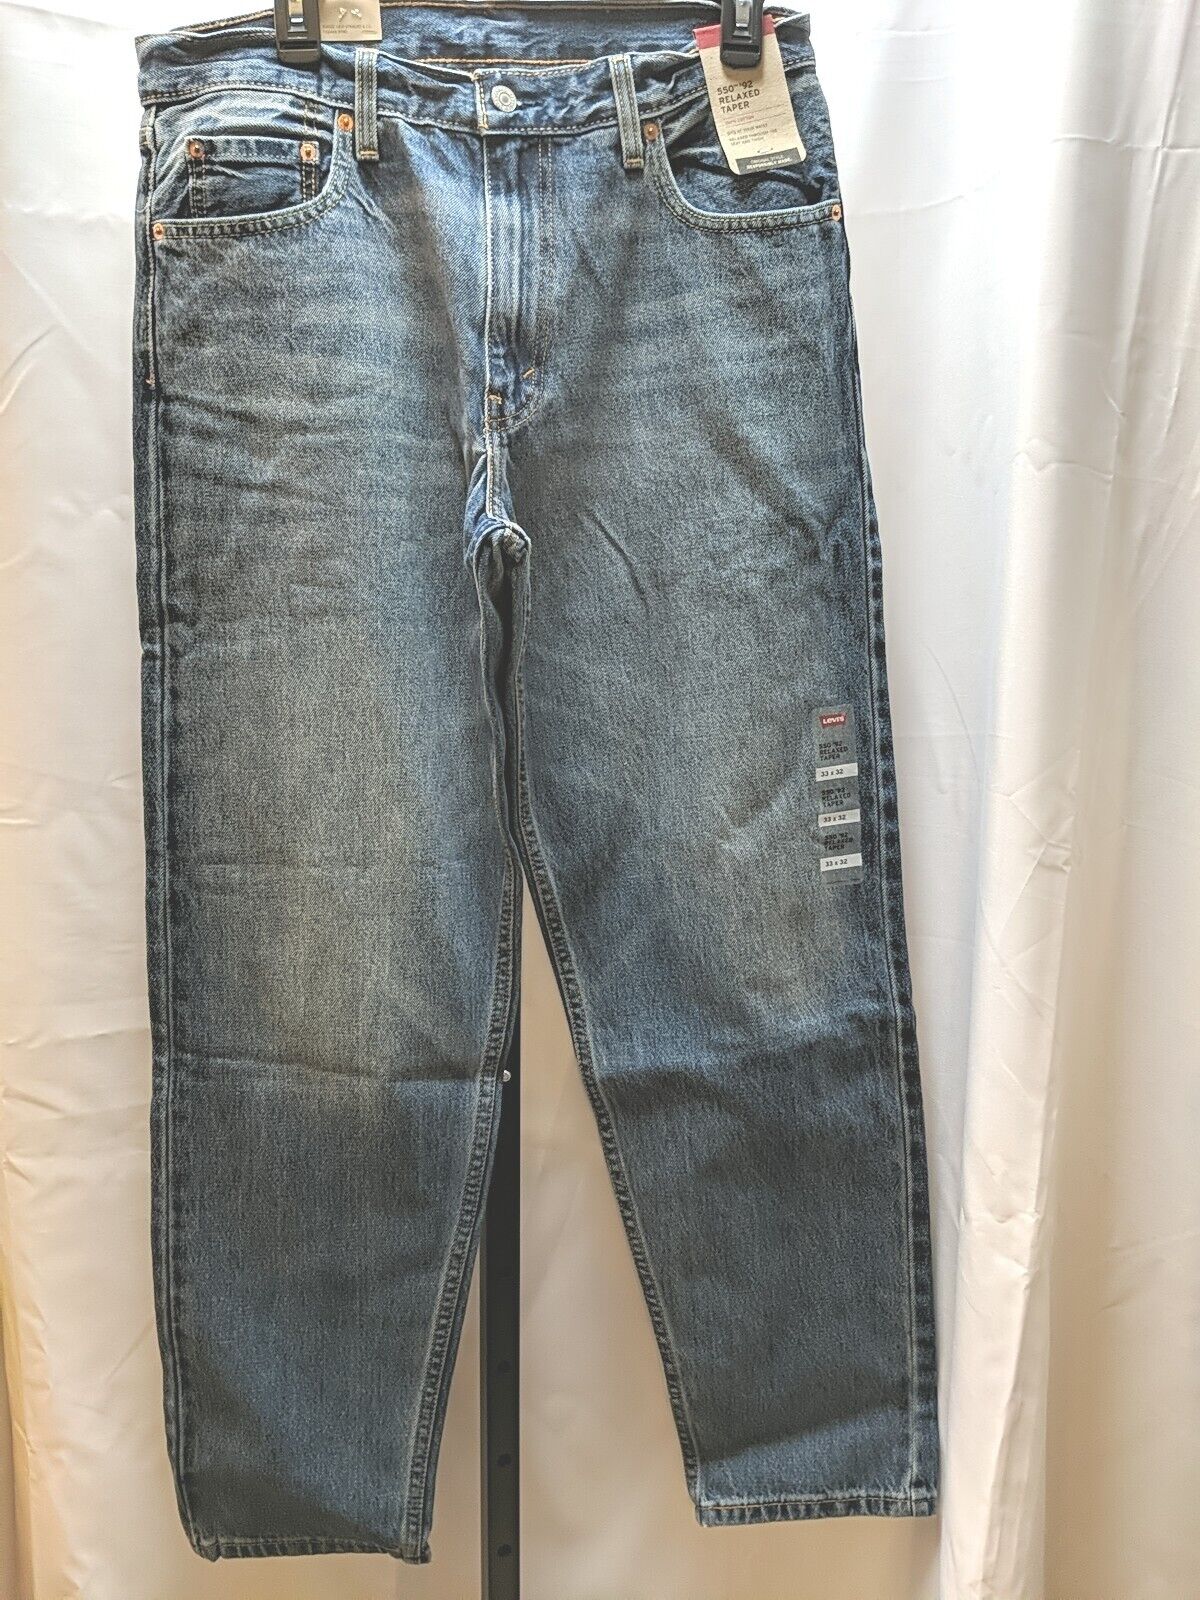 MENS 33X32 LEVI JEANS 550 '92 Relaxed Taper Medium Wash 100% Cotton NWT Levi's Levi's 550